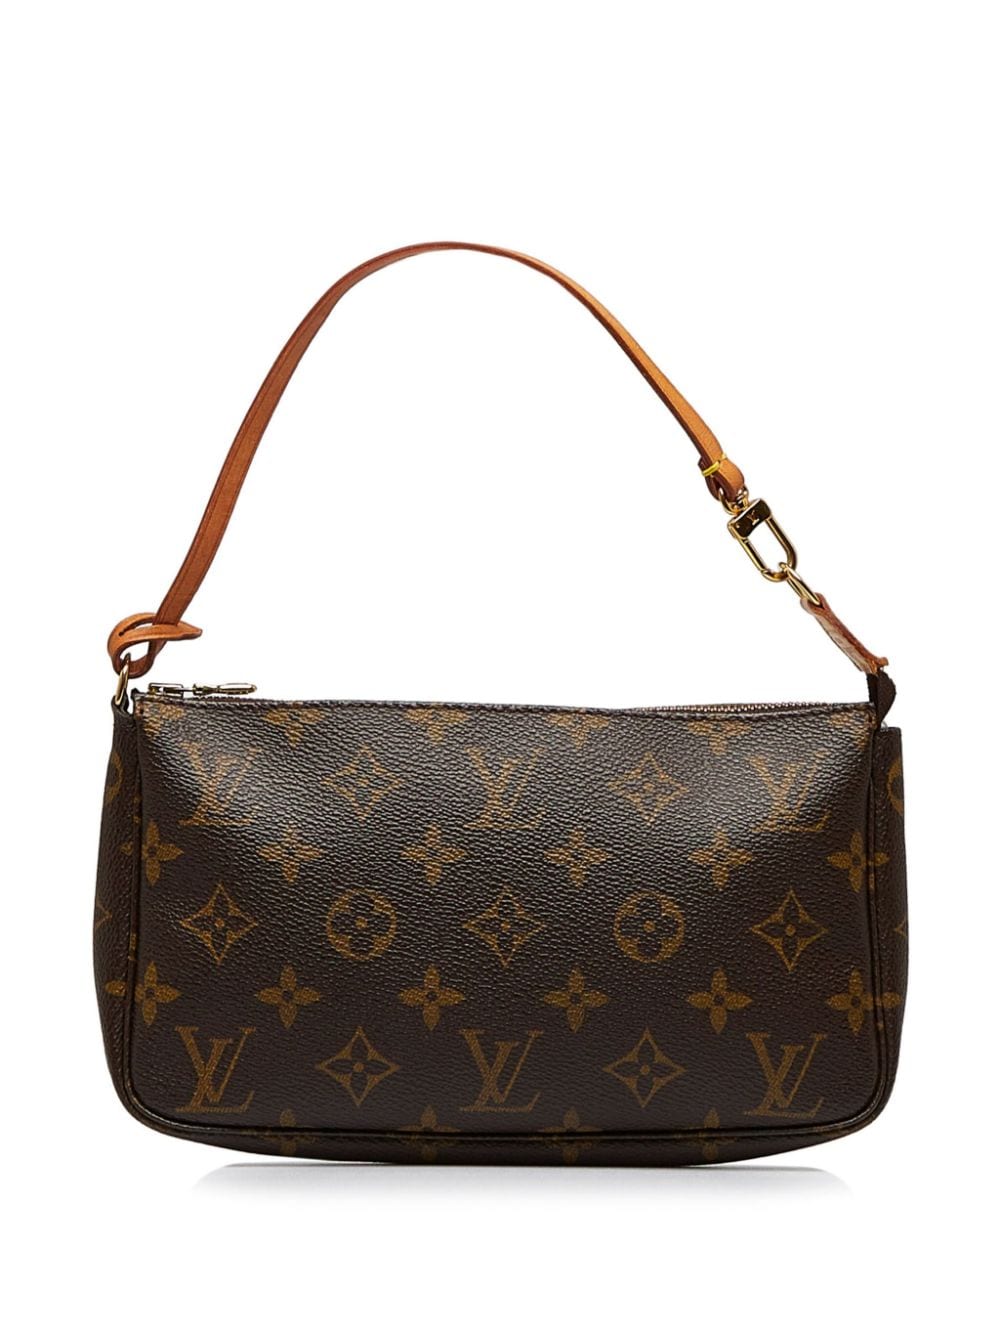 Louis Vuitton 2002 pre-owned Monogram 15 Cosmetic Pouch - Farfetch